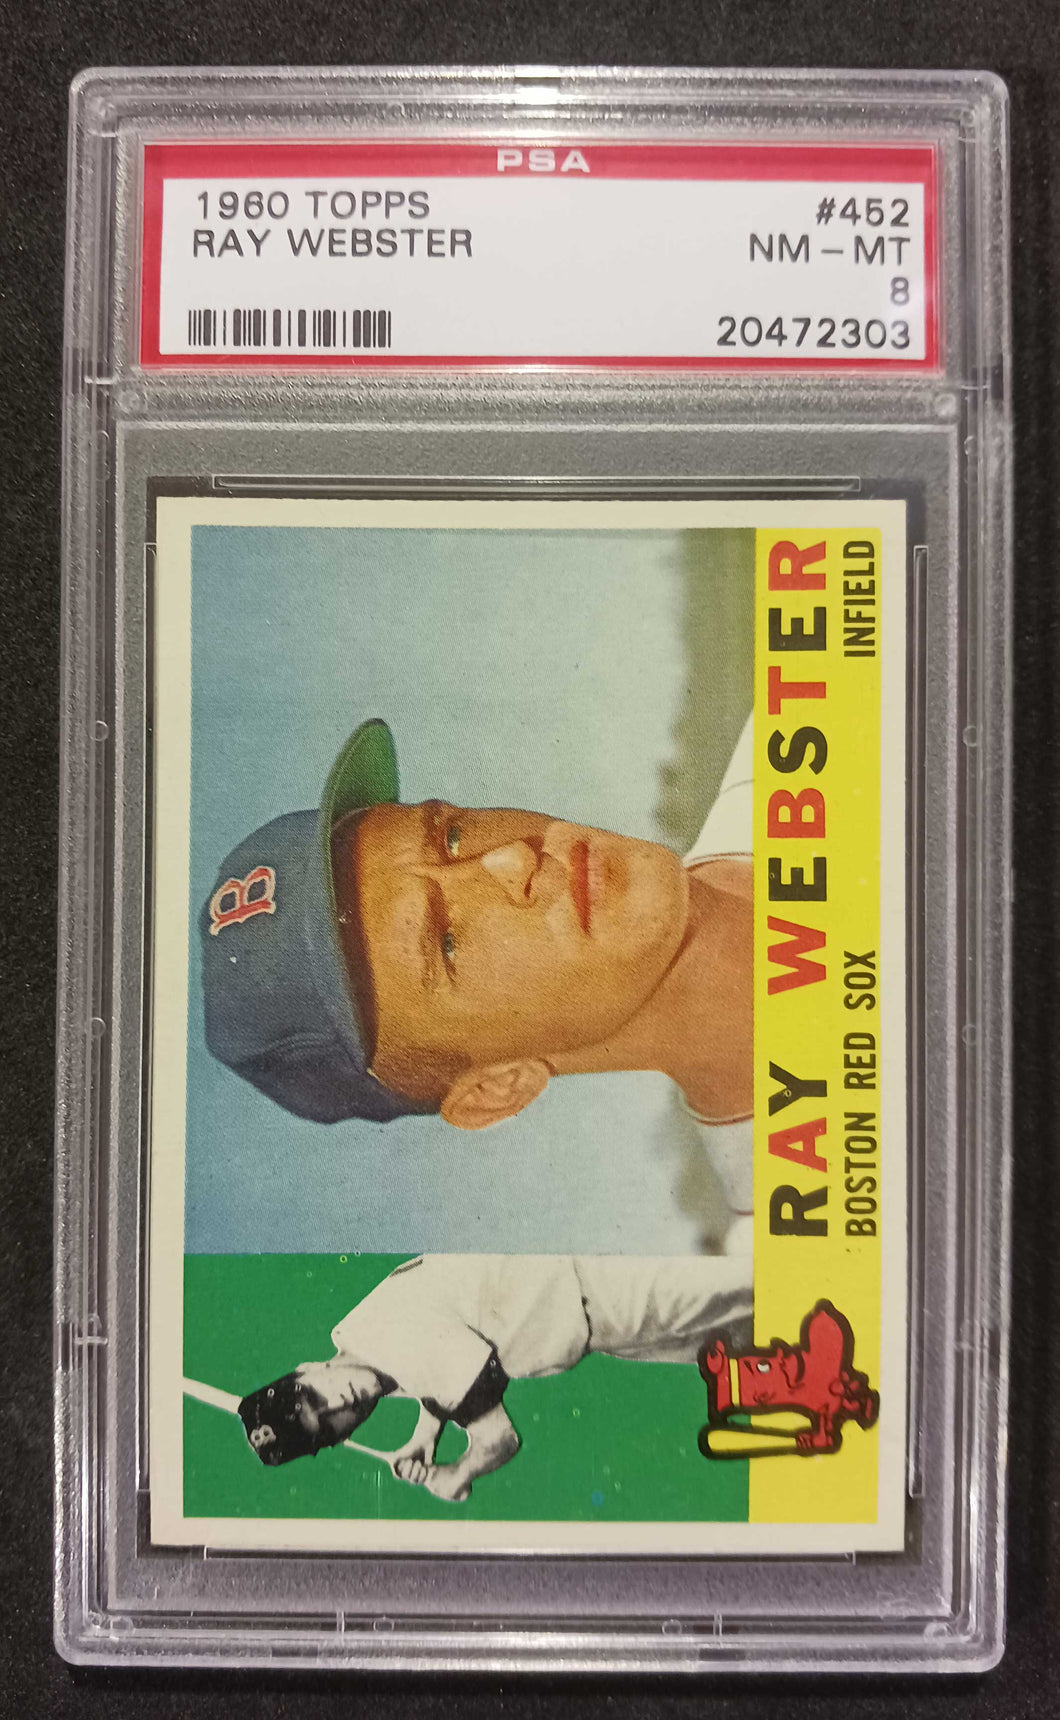 1960 Topps Ray Webster #452 PSA NM - MT 8